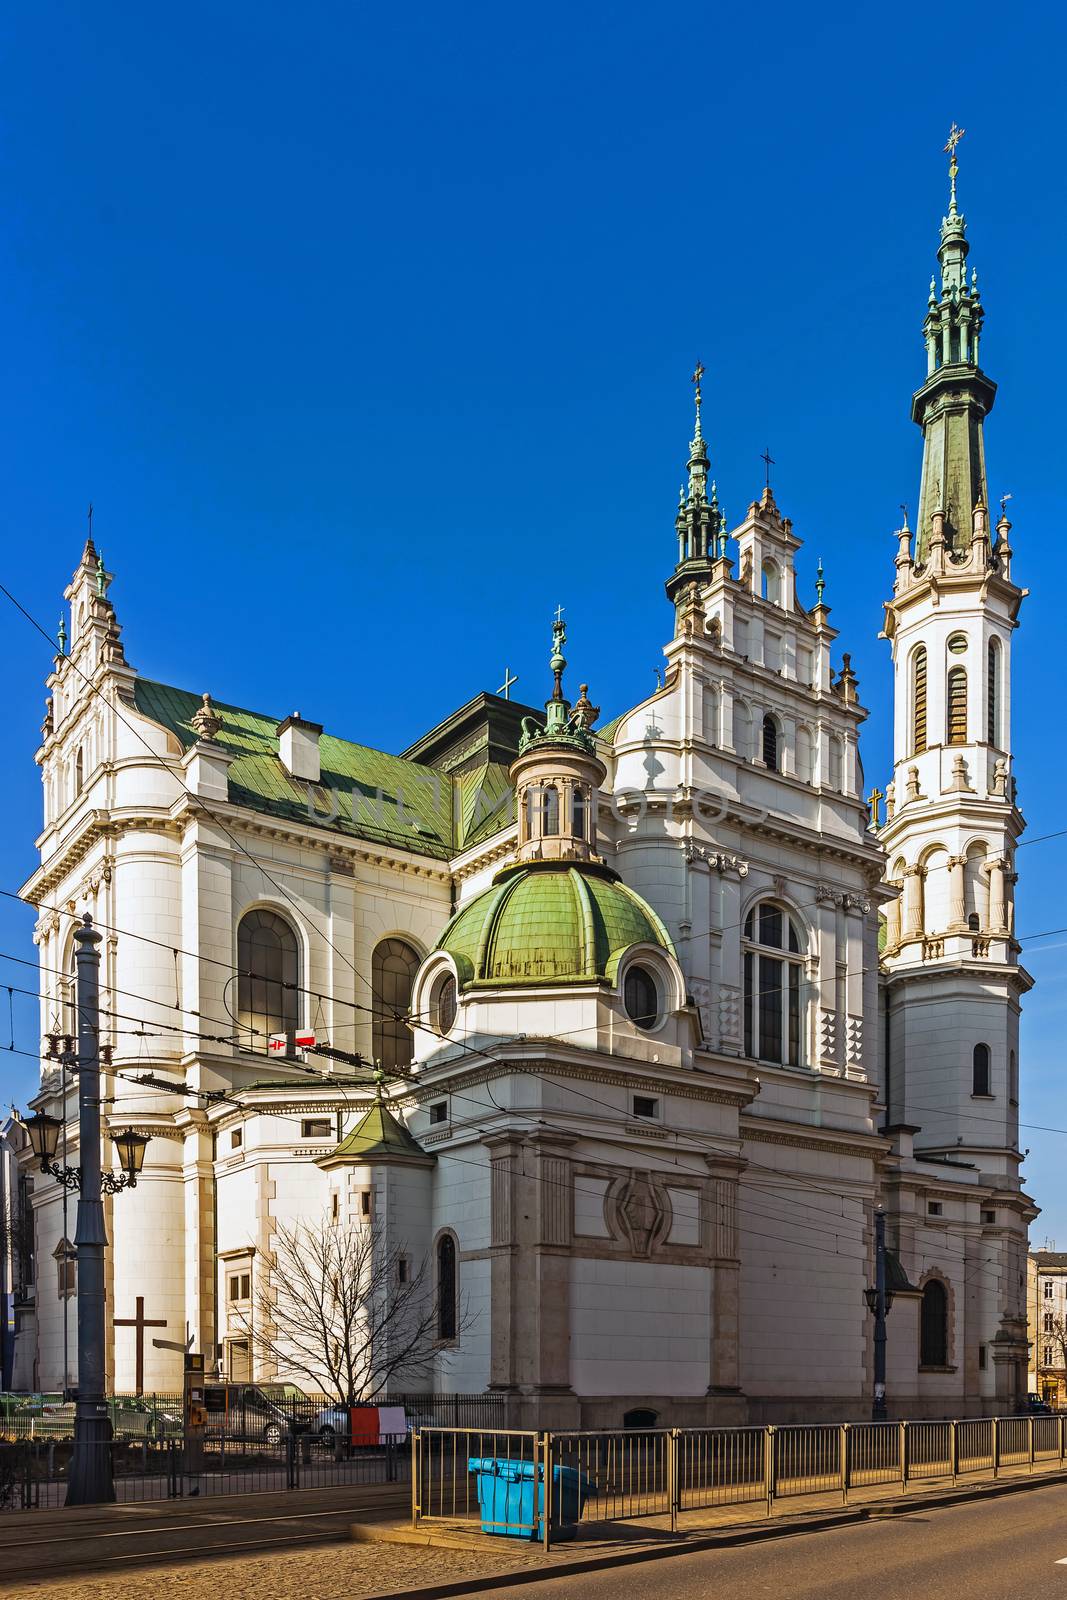 Church of the Holy Redeemer in Warsaw, Poland. Eclectic church built in 1903 in a style referring to the Baroque and Renaissance.